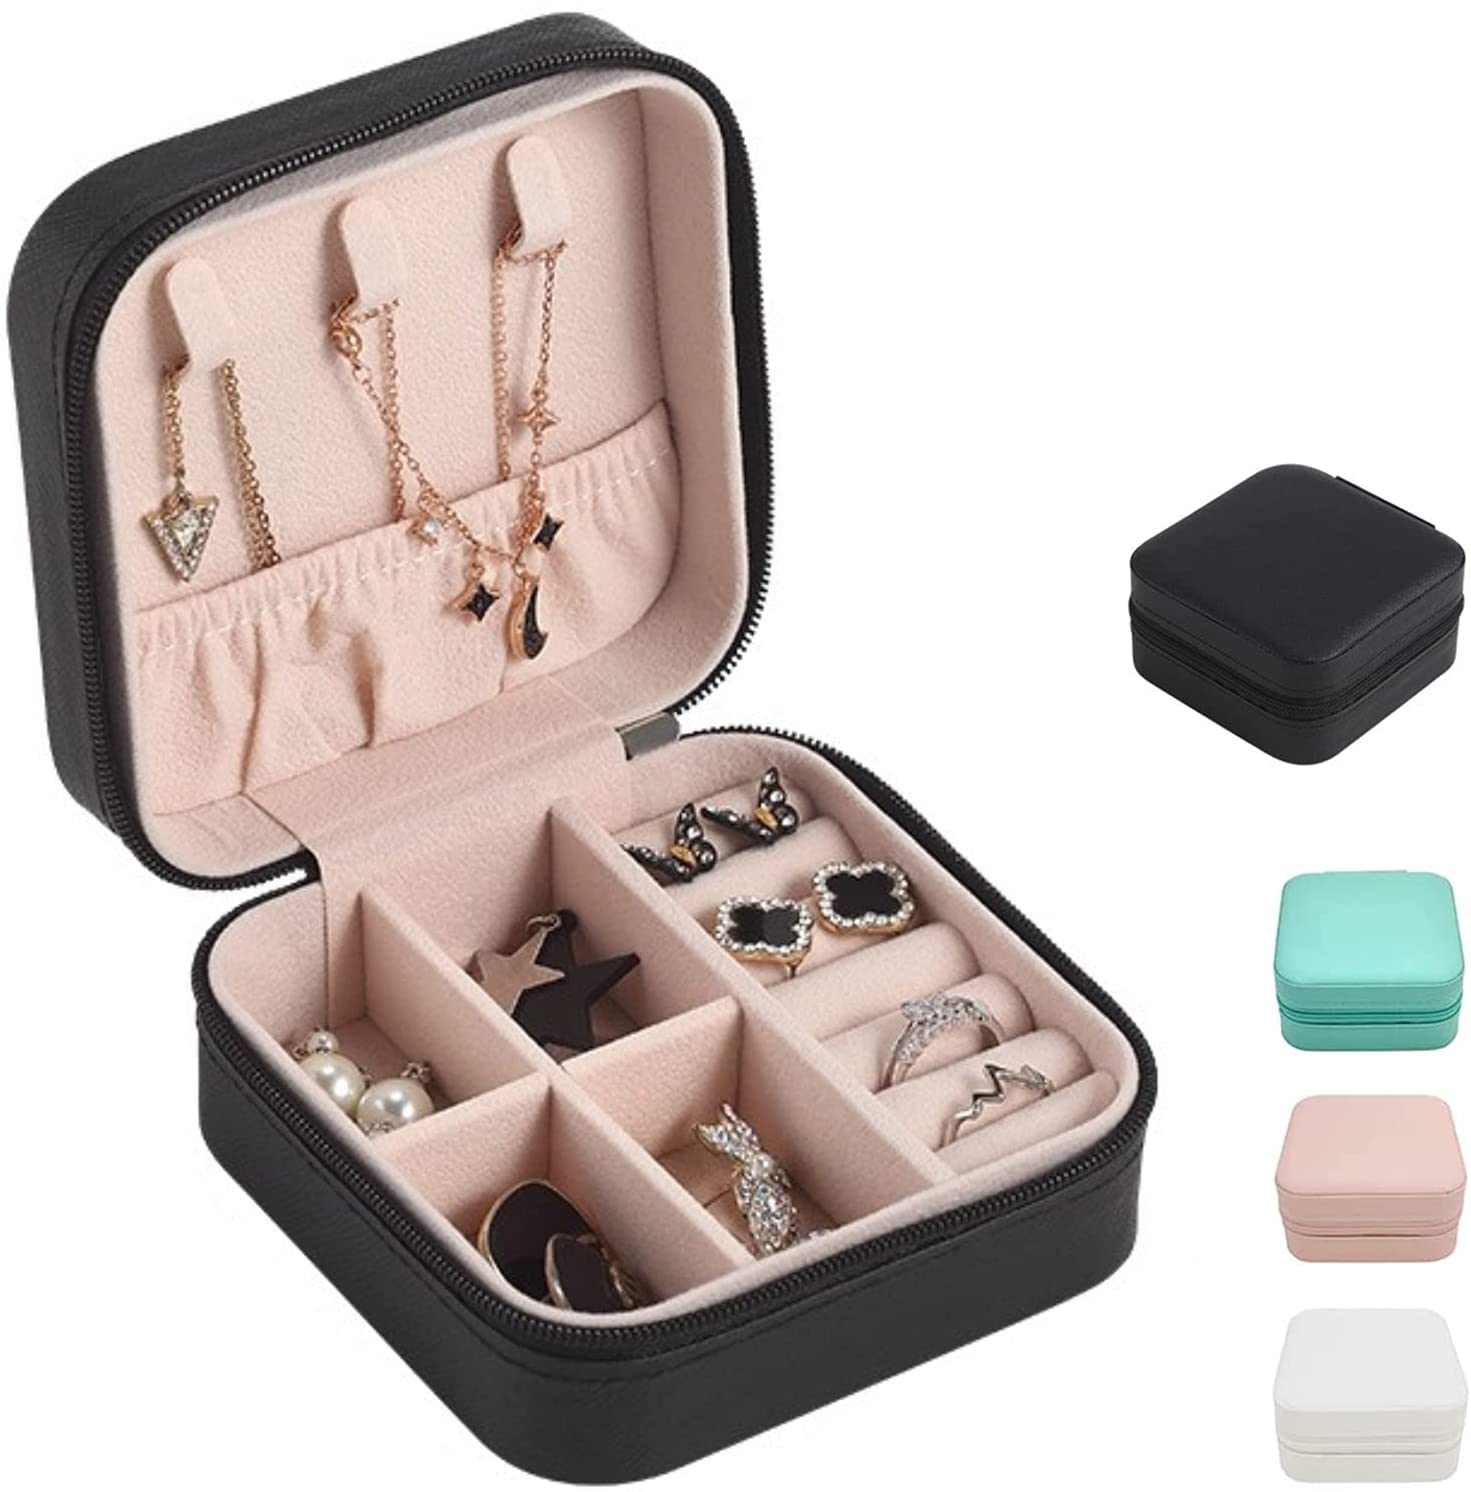 Portable Jewelry PU Box Storage Case Travel Ring Earring Necklace Organizer 